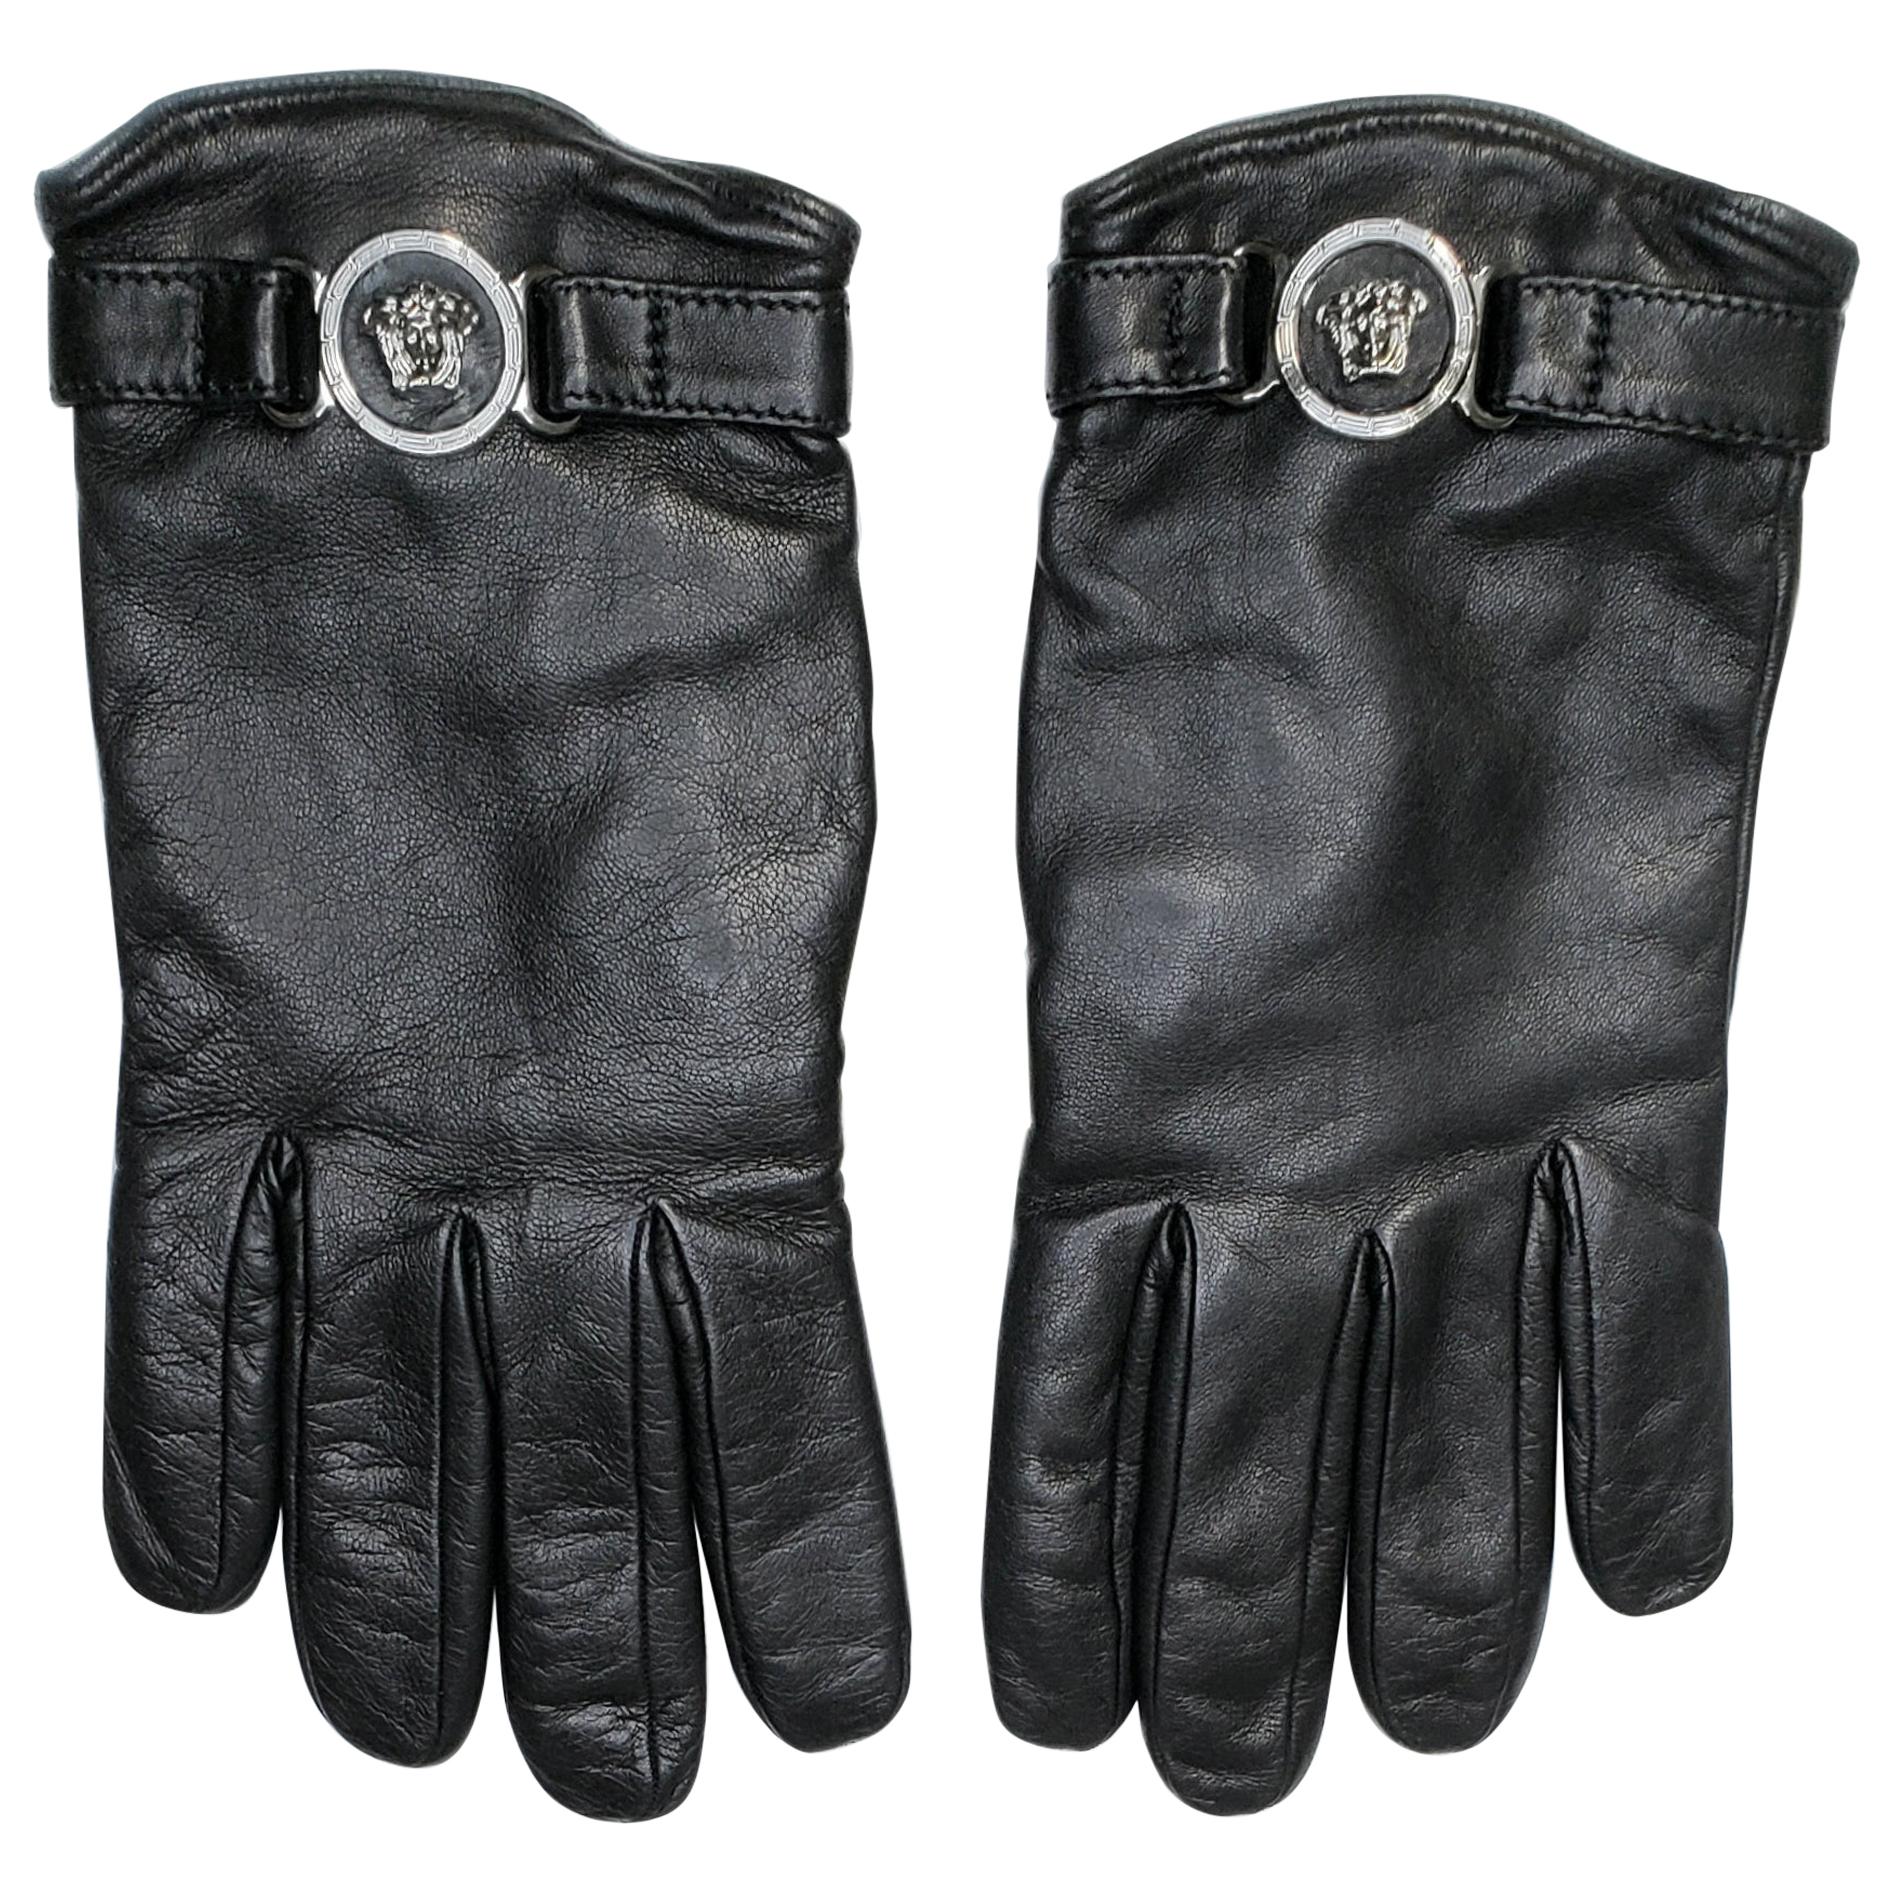 F/W 2011 look # 44 NEW VERSACE BLACK LEATHER GLOVES sz M